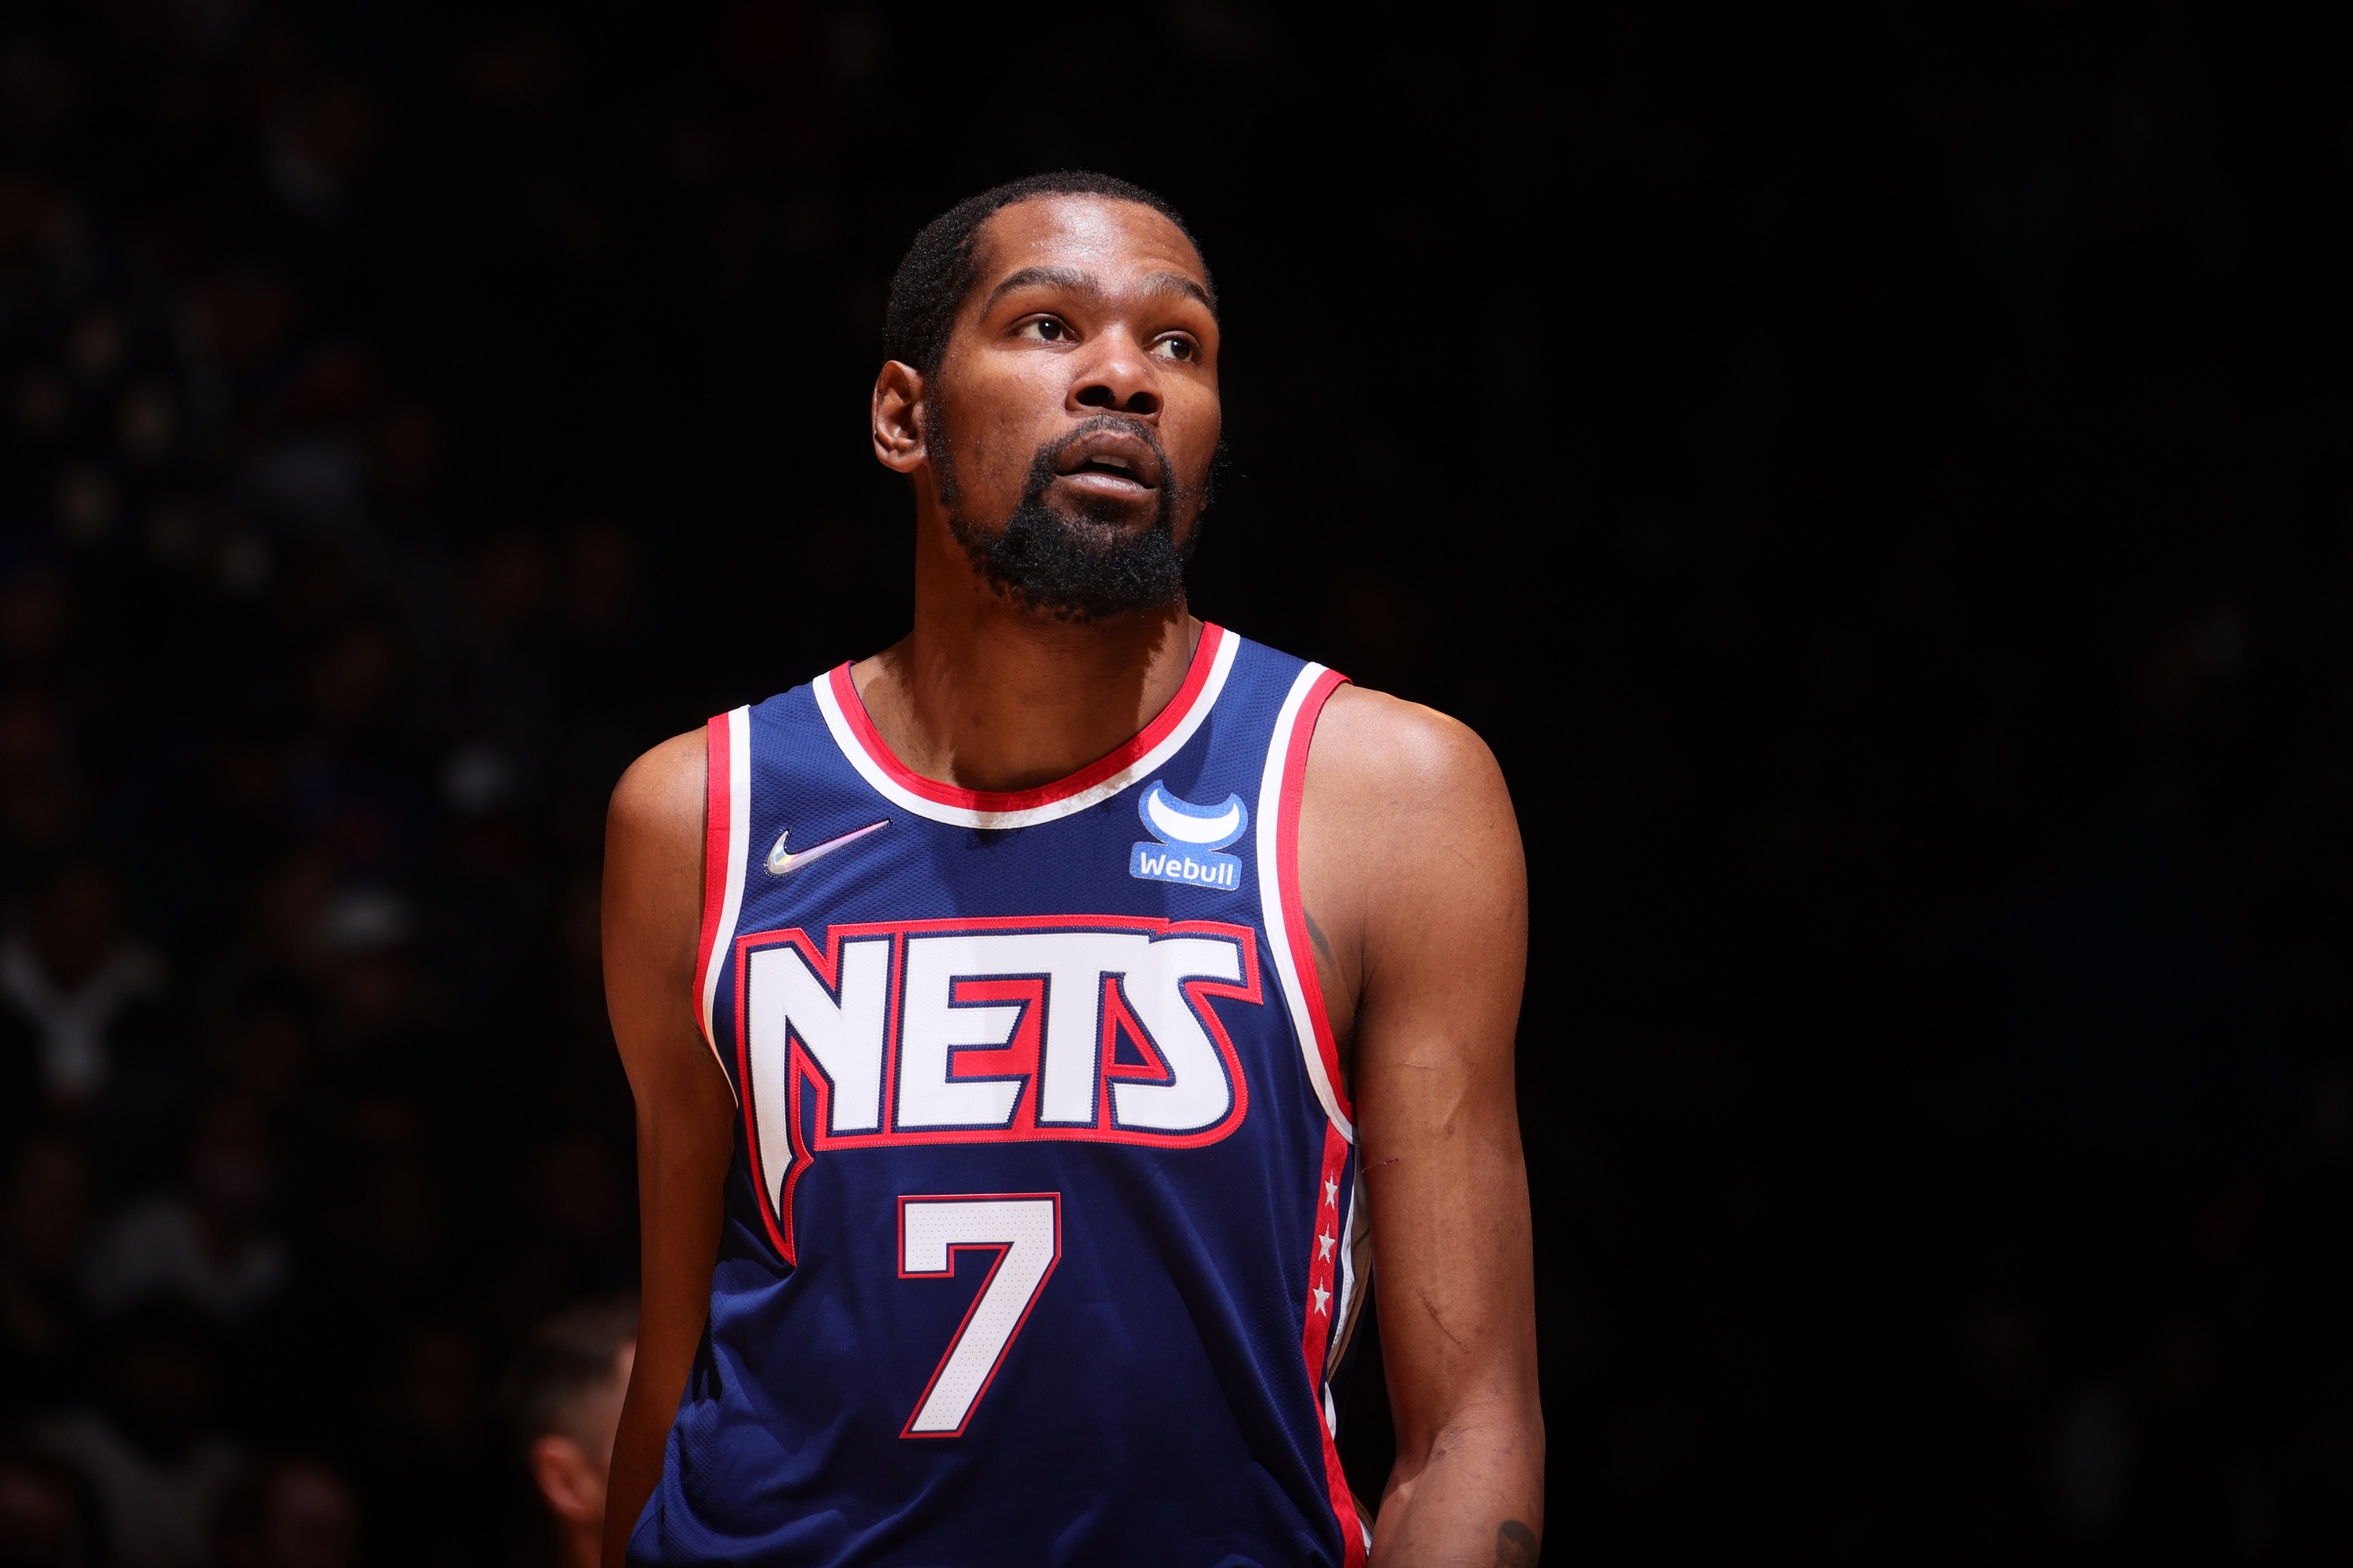 Nets' Kevin Durant on Minutes Limit: 'I Enjoy to Play; I Want to Play 48 Minutes..